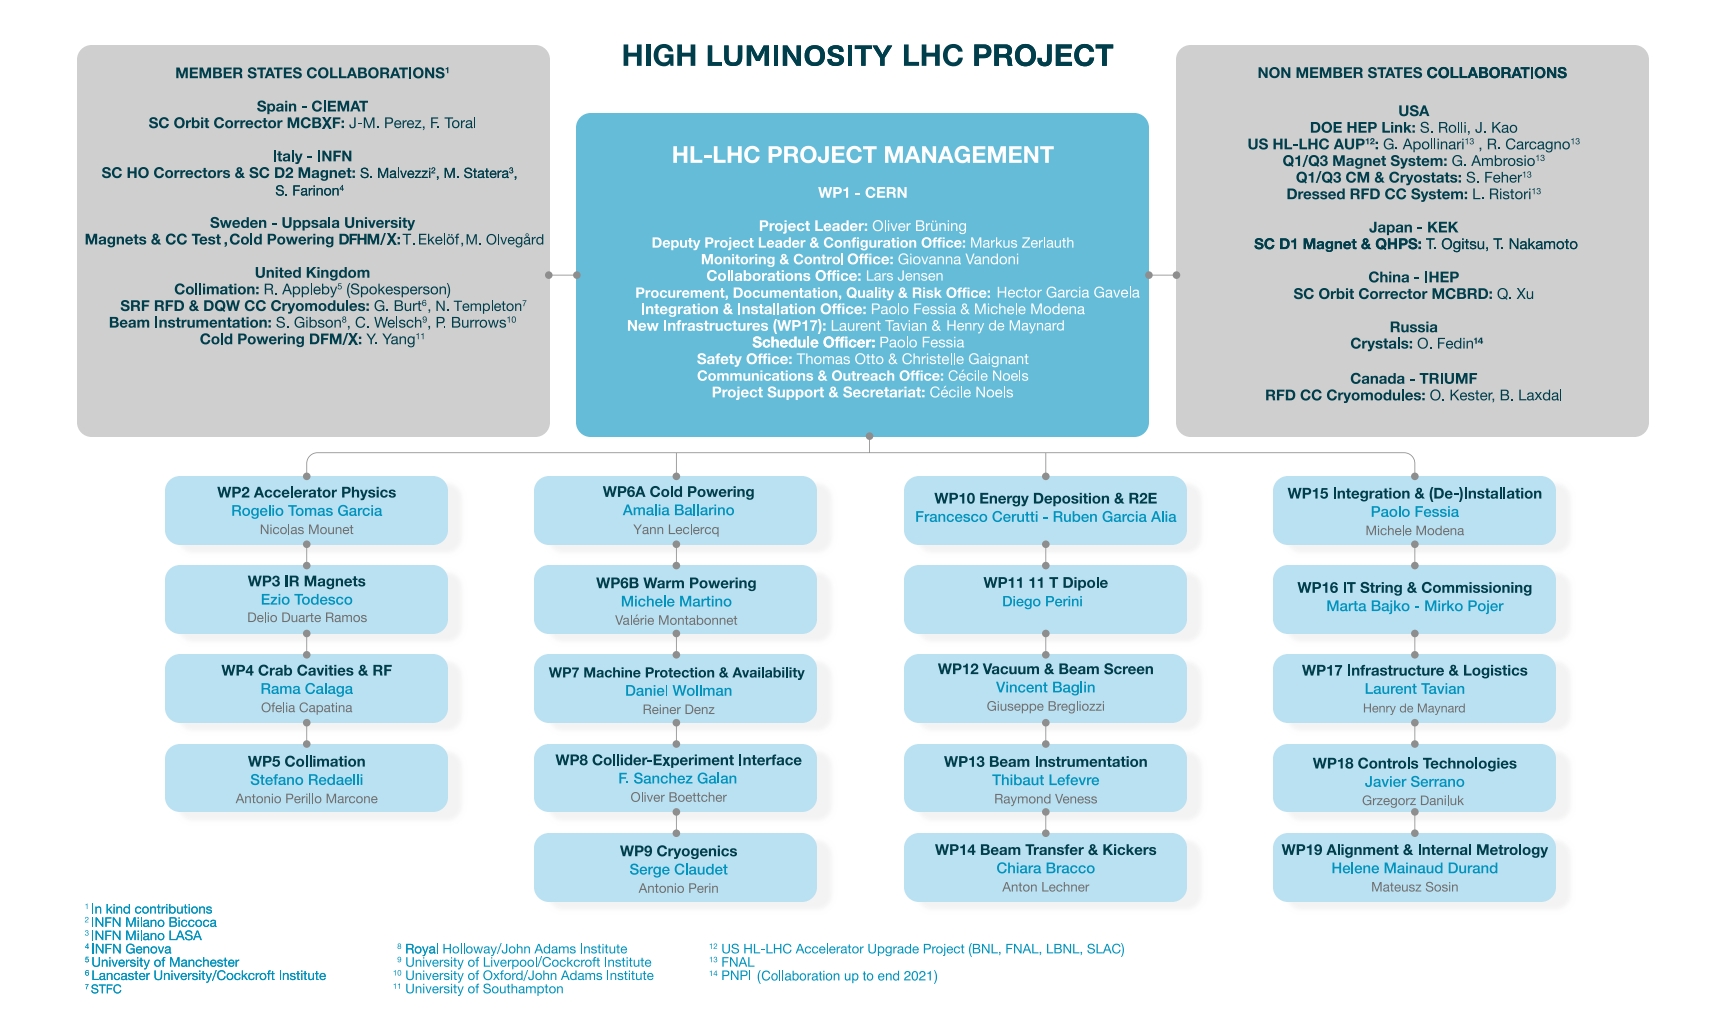 HL-LHC Project structure and collaborations